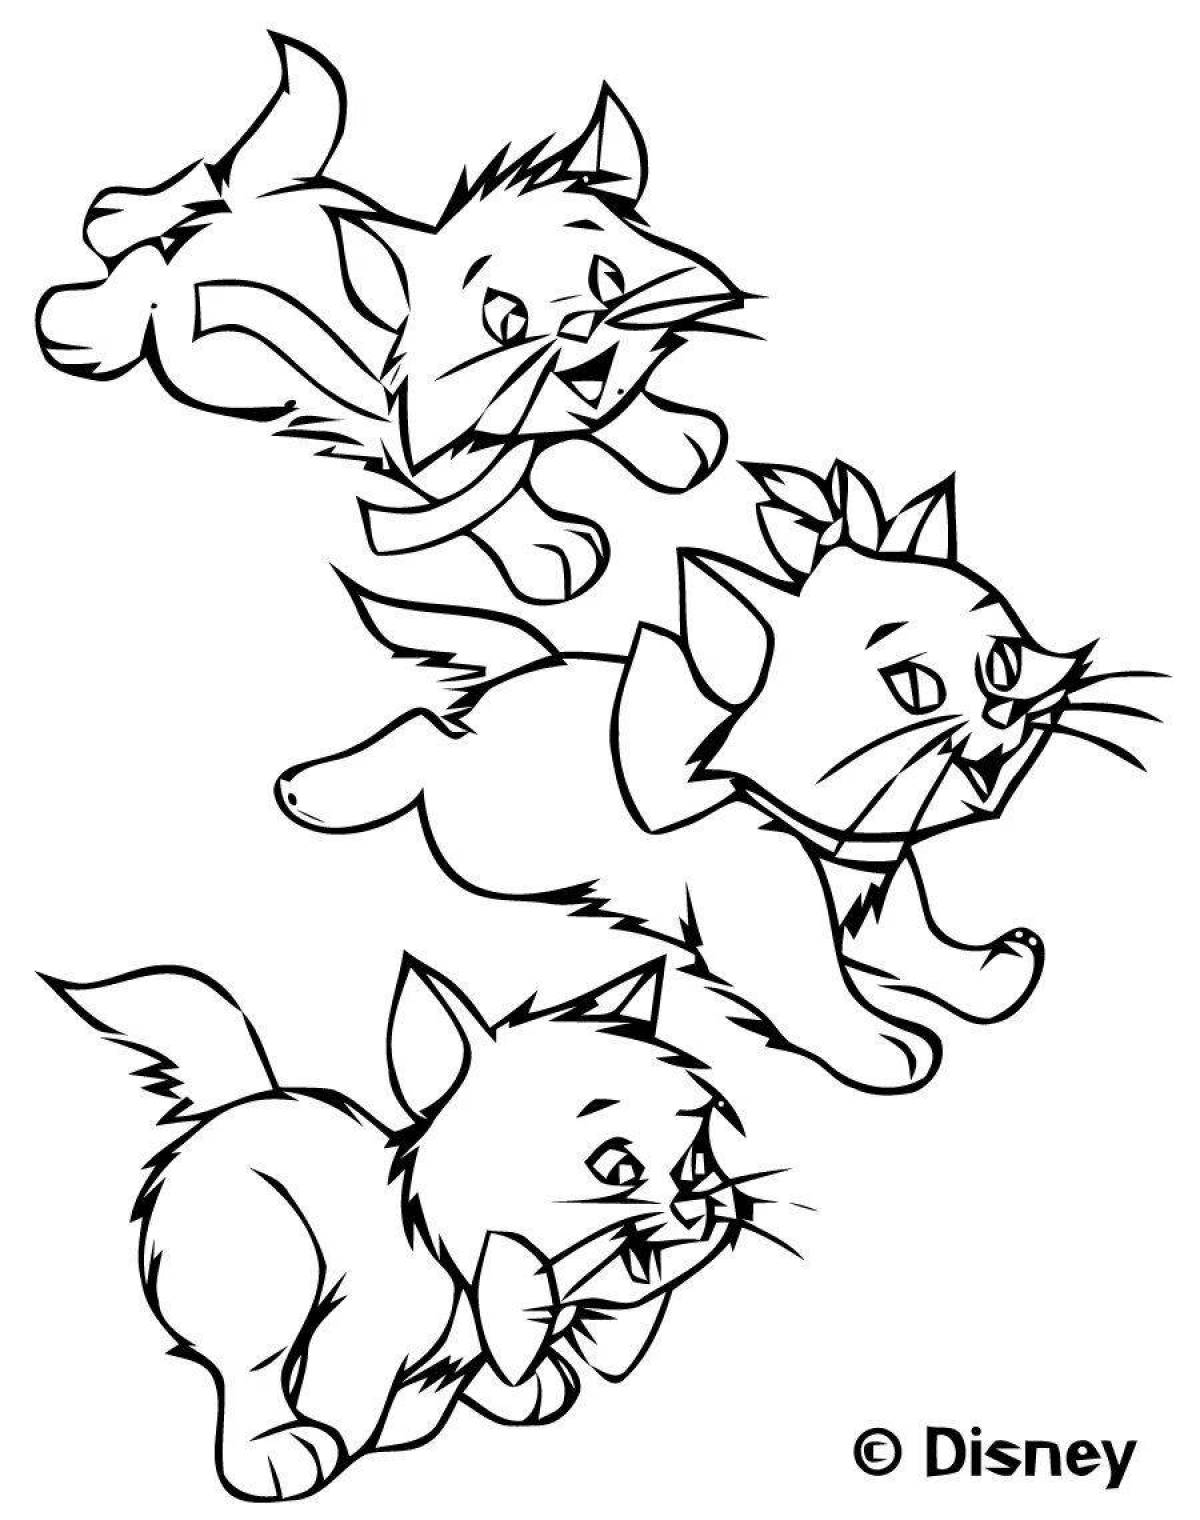 Charming coloring 3 kittens